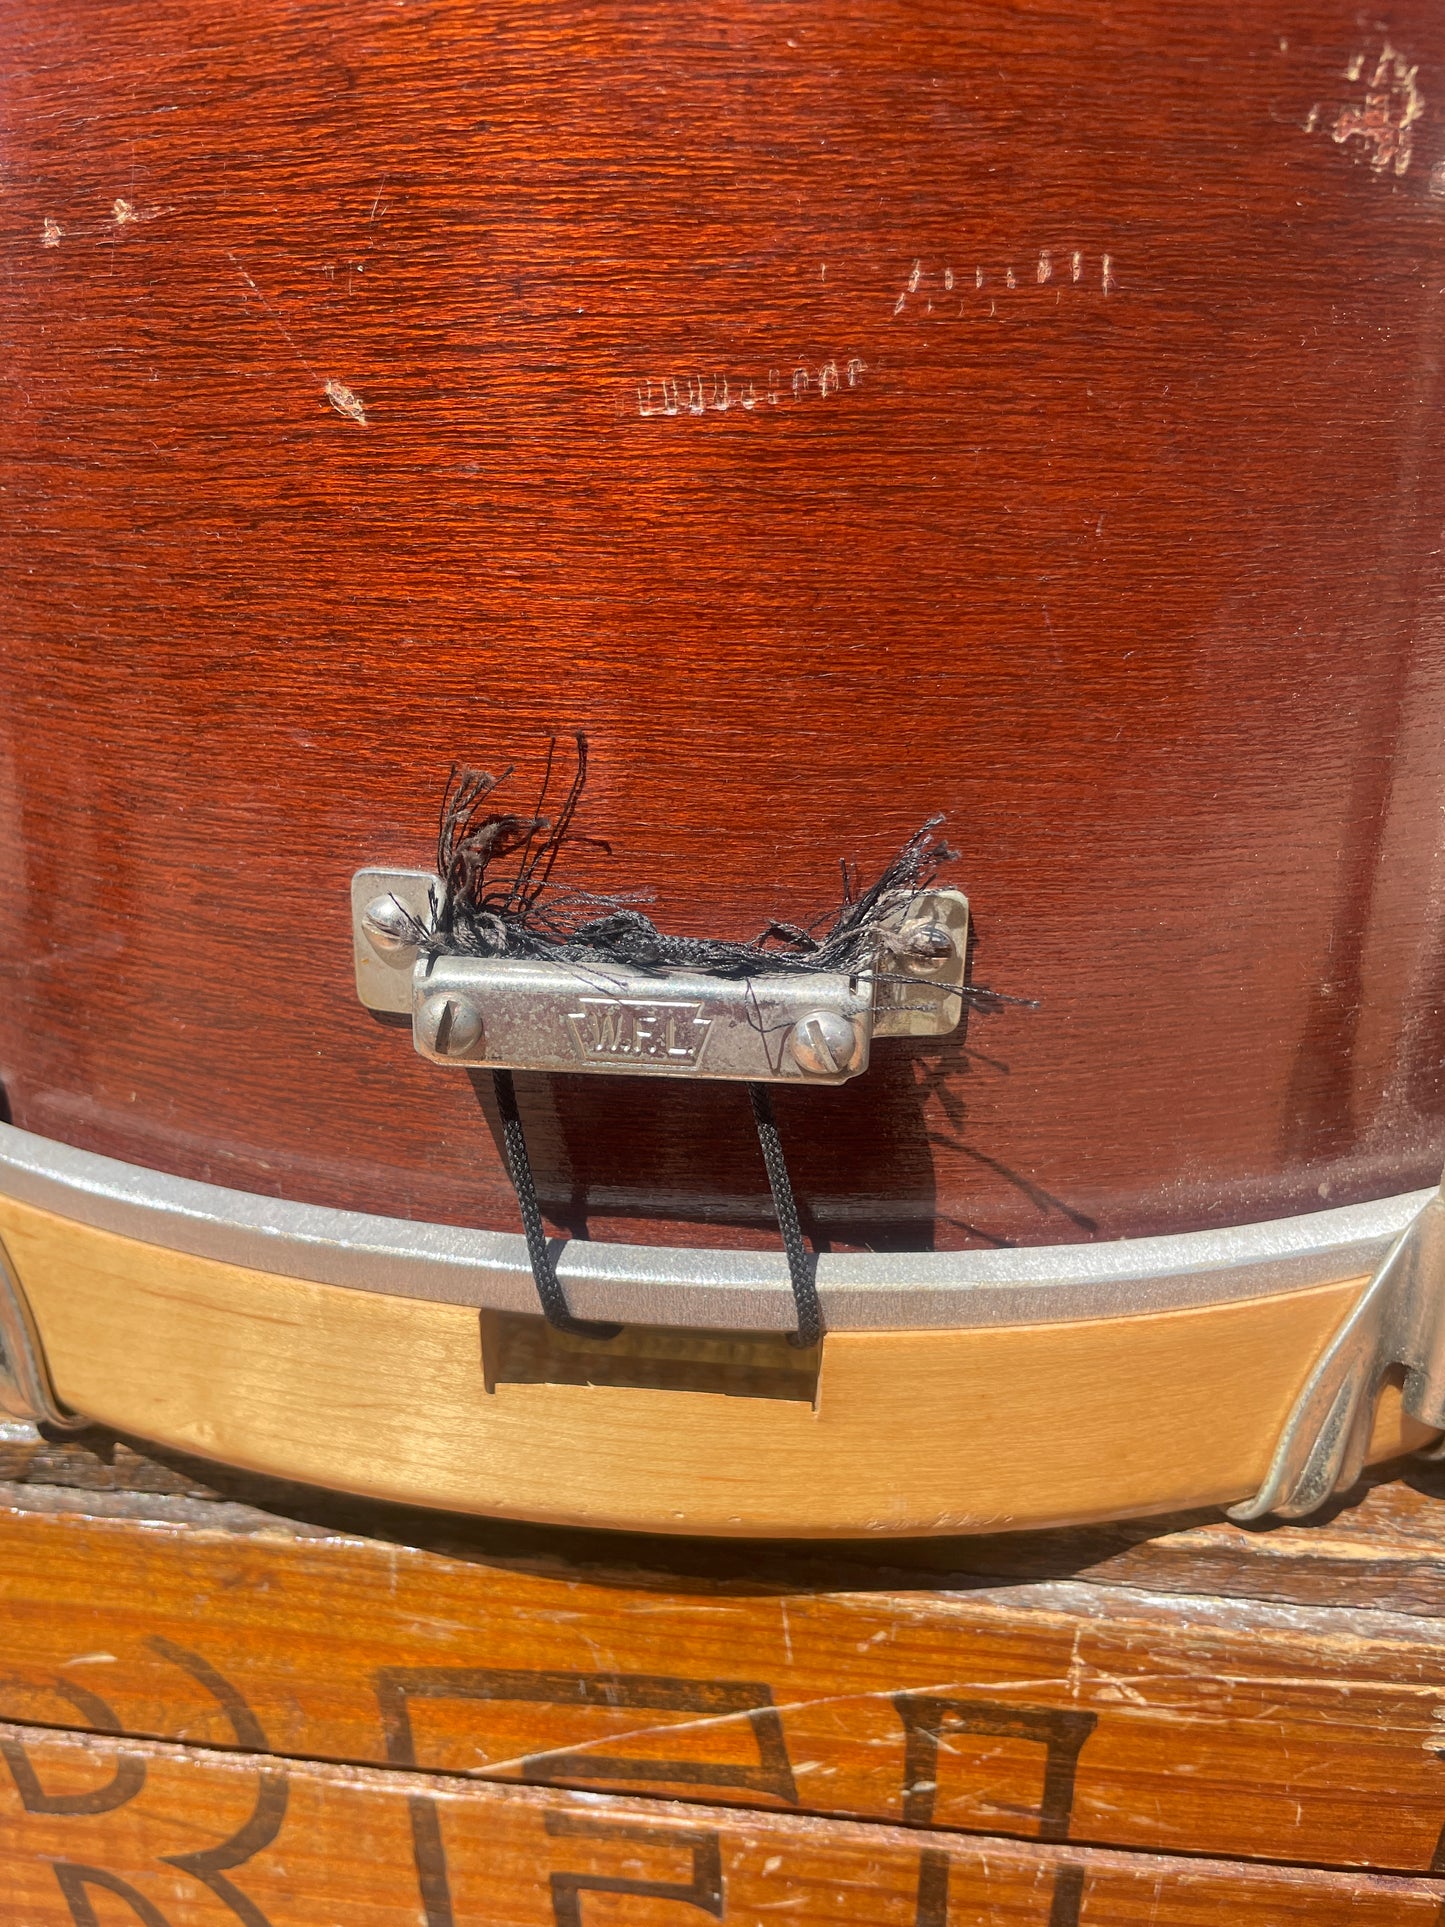 1950s WFL No. 3062 Prep Model 10x14 Parade Drum Mahogany Marching Snare Field Drum Ludwig